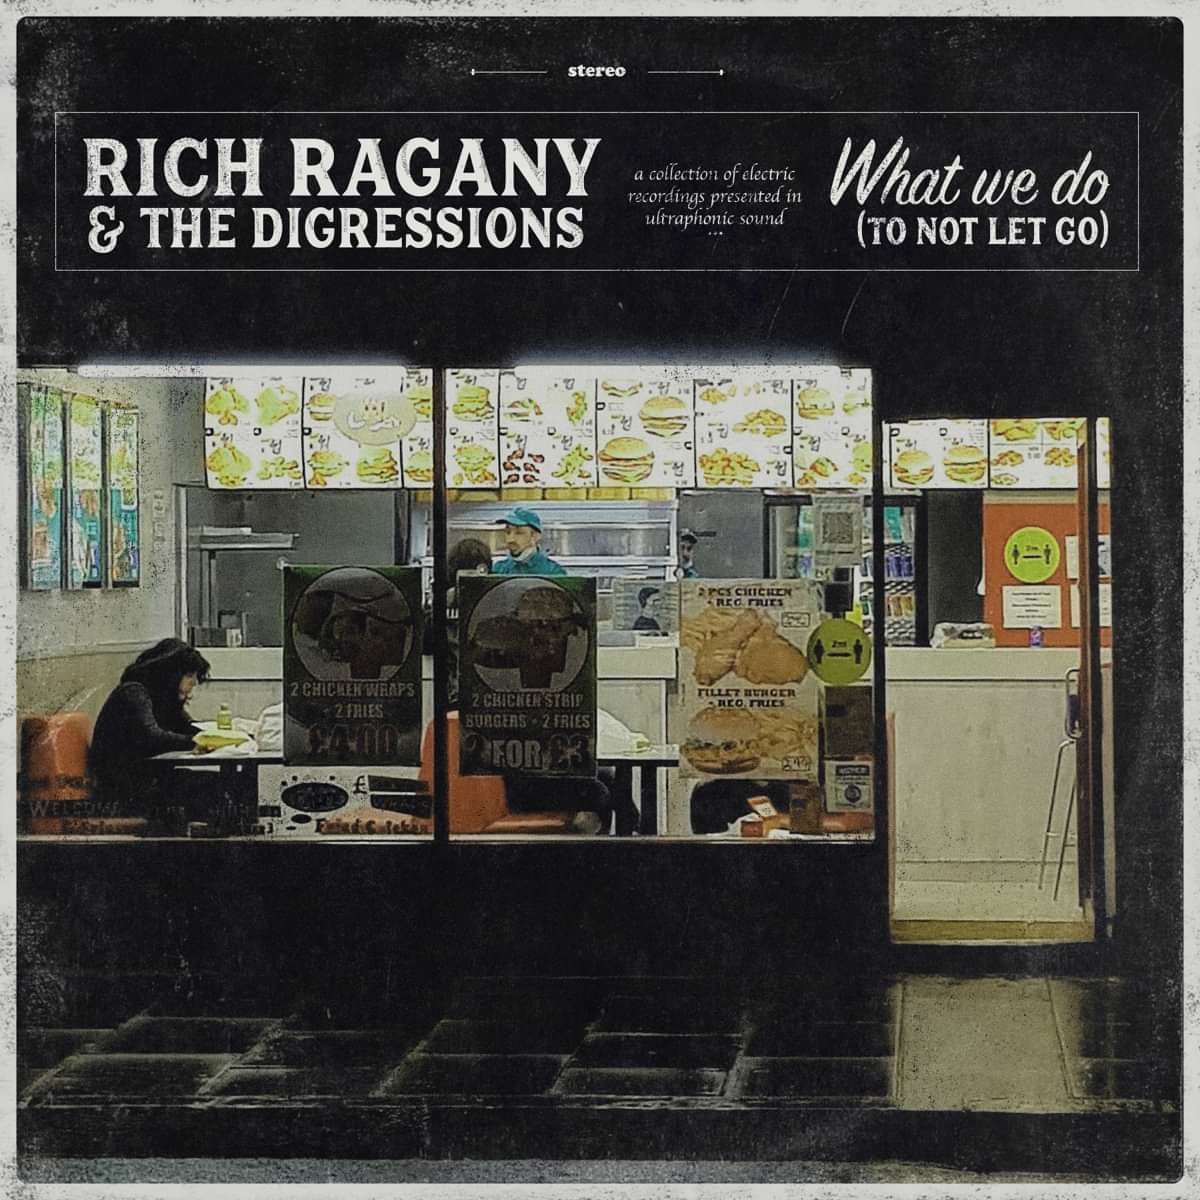 Rich Ragany & The Digressions - What We Do (To Not Let Go) - CD bundle - Barrel And Squidger Records